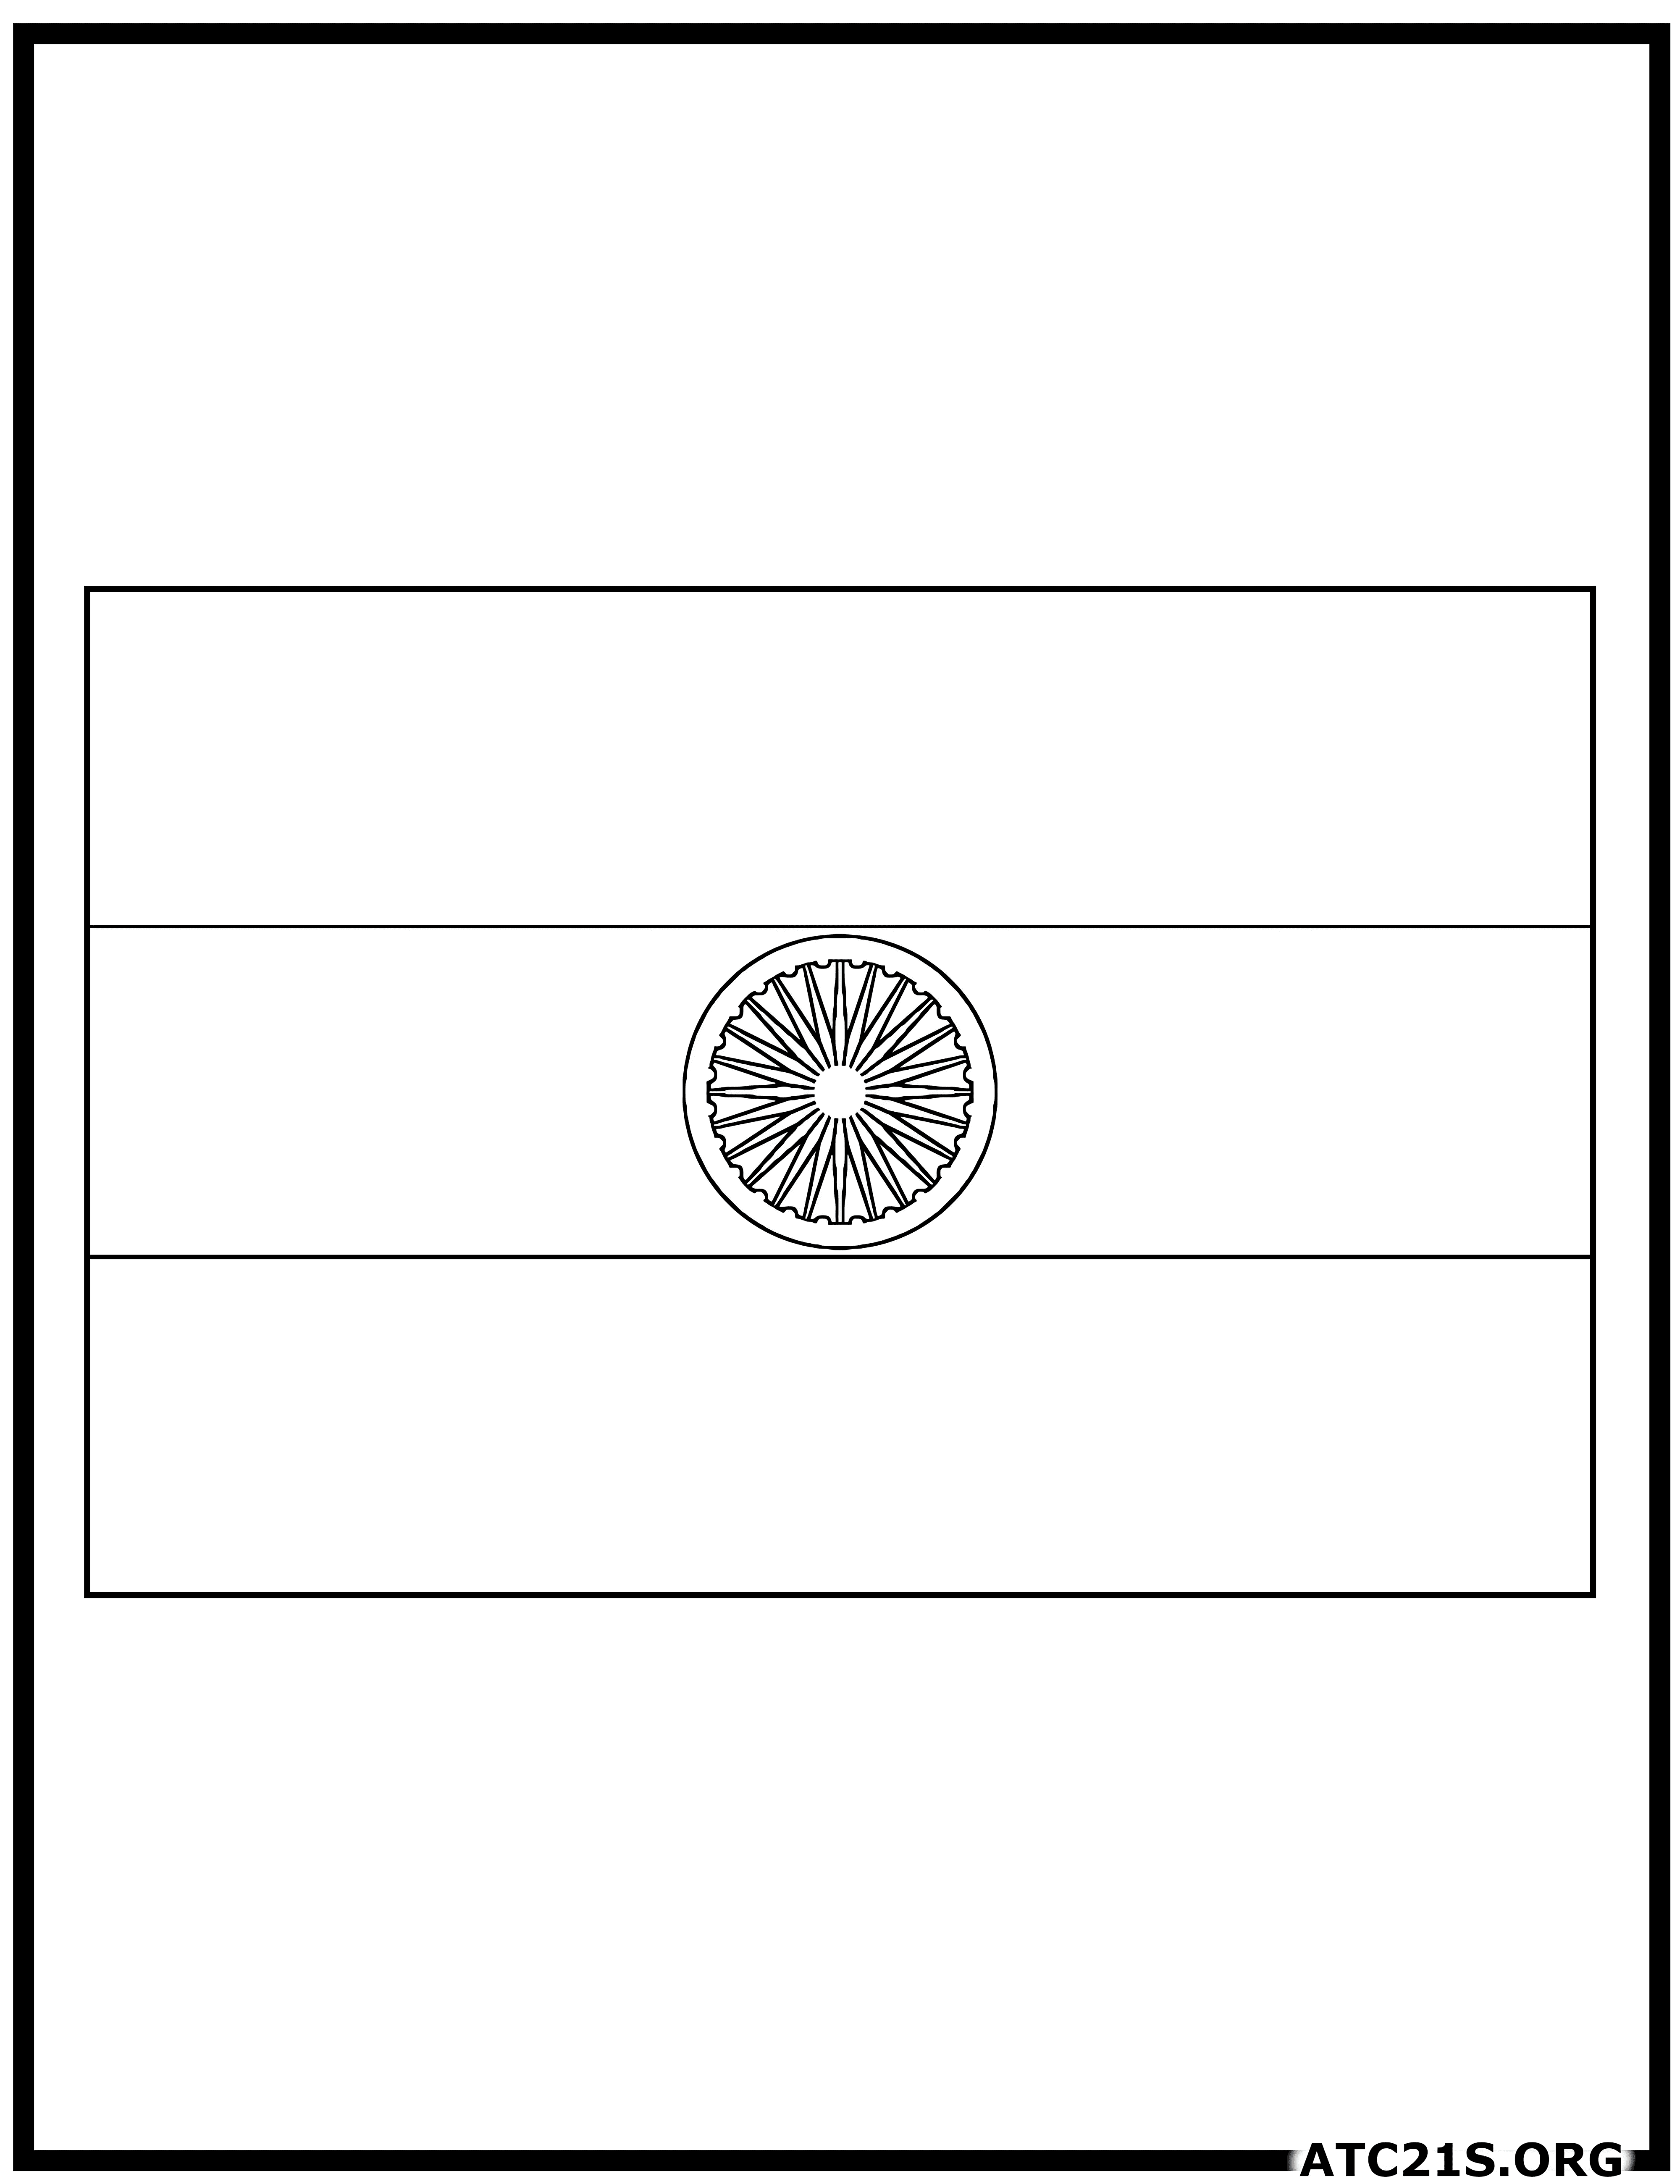 India_flag_coloring_page